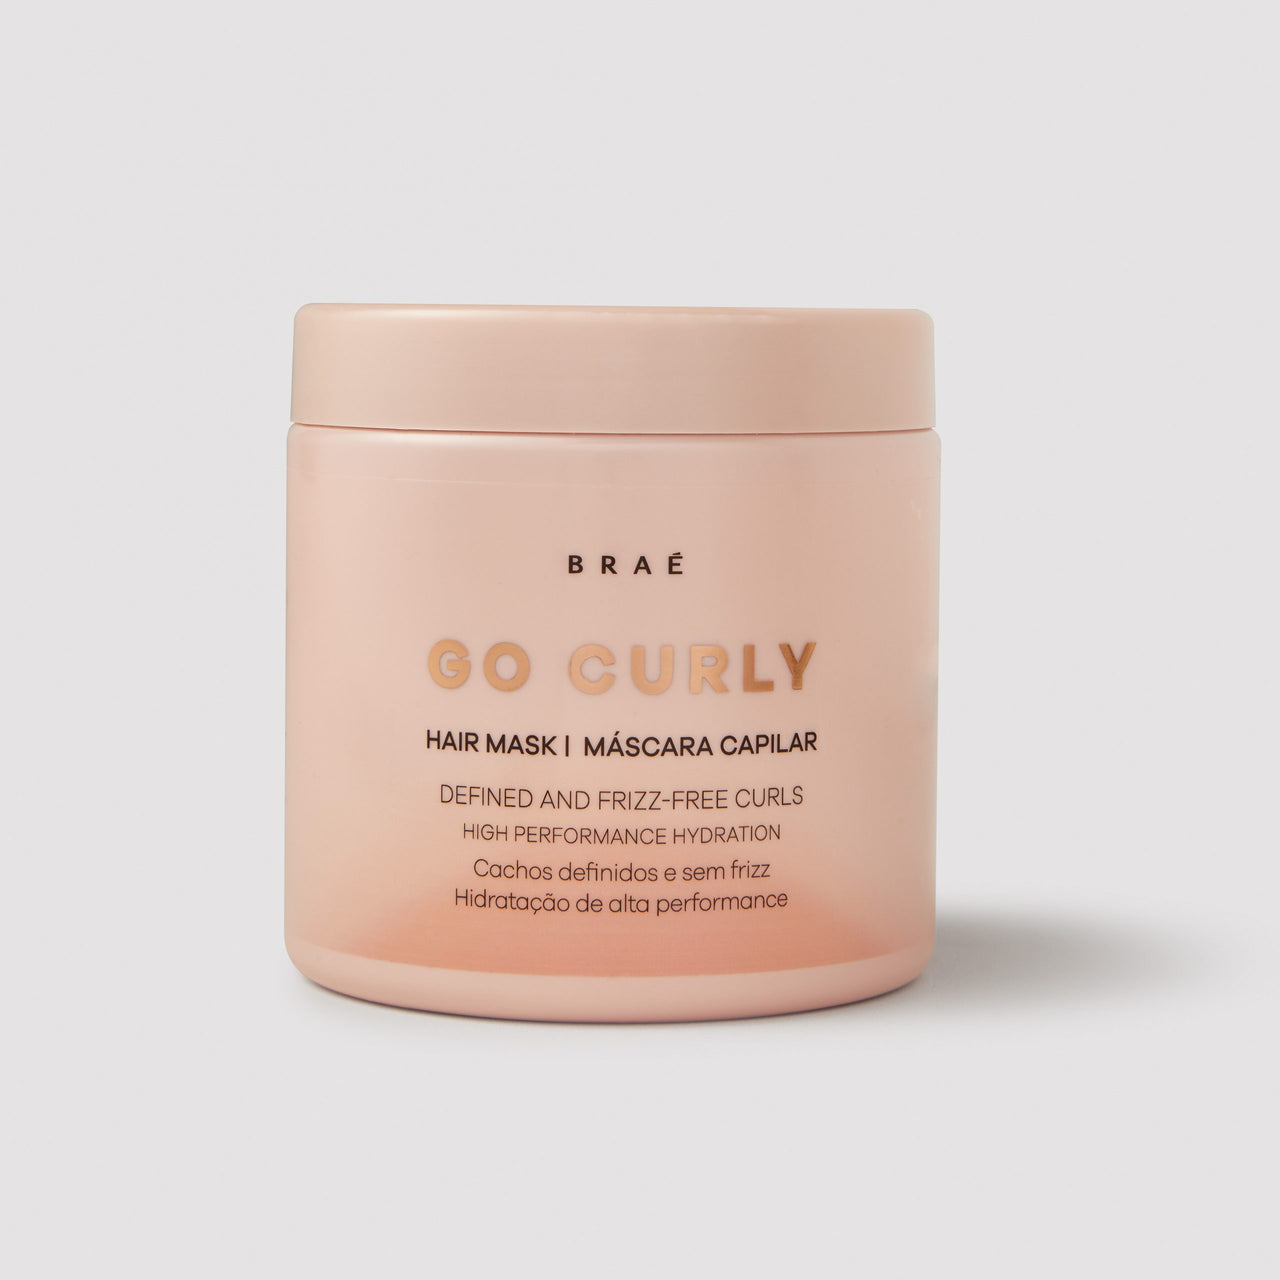 BRAE - Go Curly Mask 500g